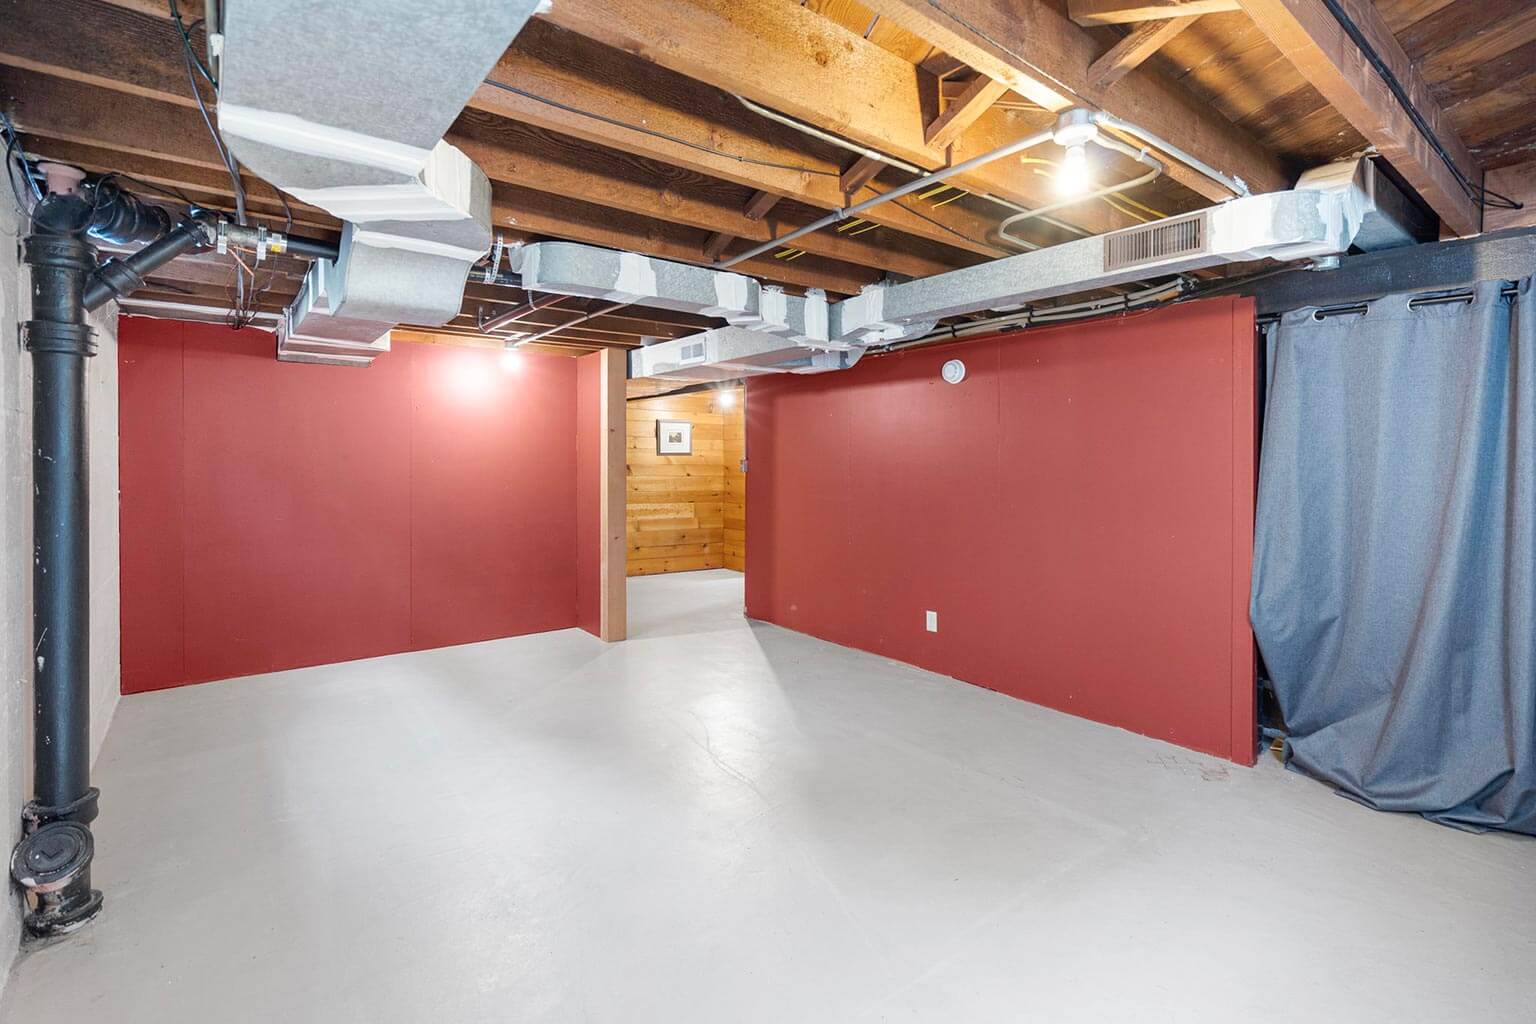 Unfinished basement with ample ceiling height offers opportunity for expanded living space